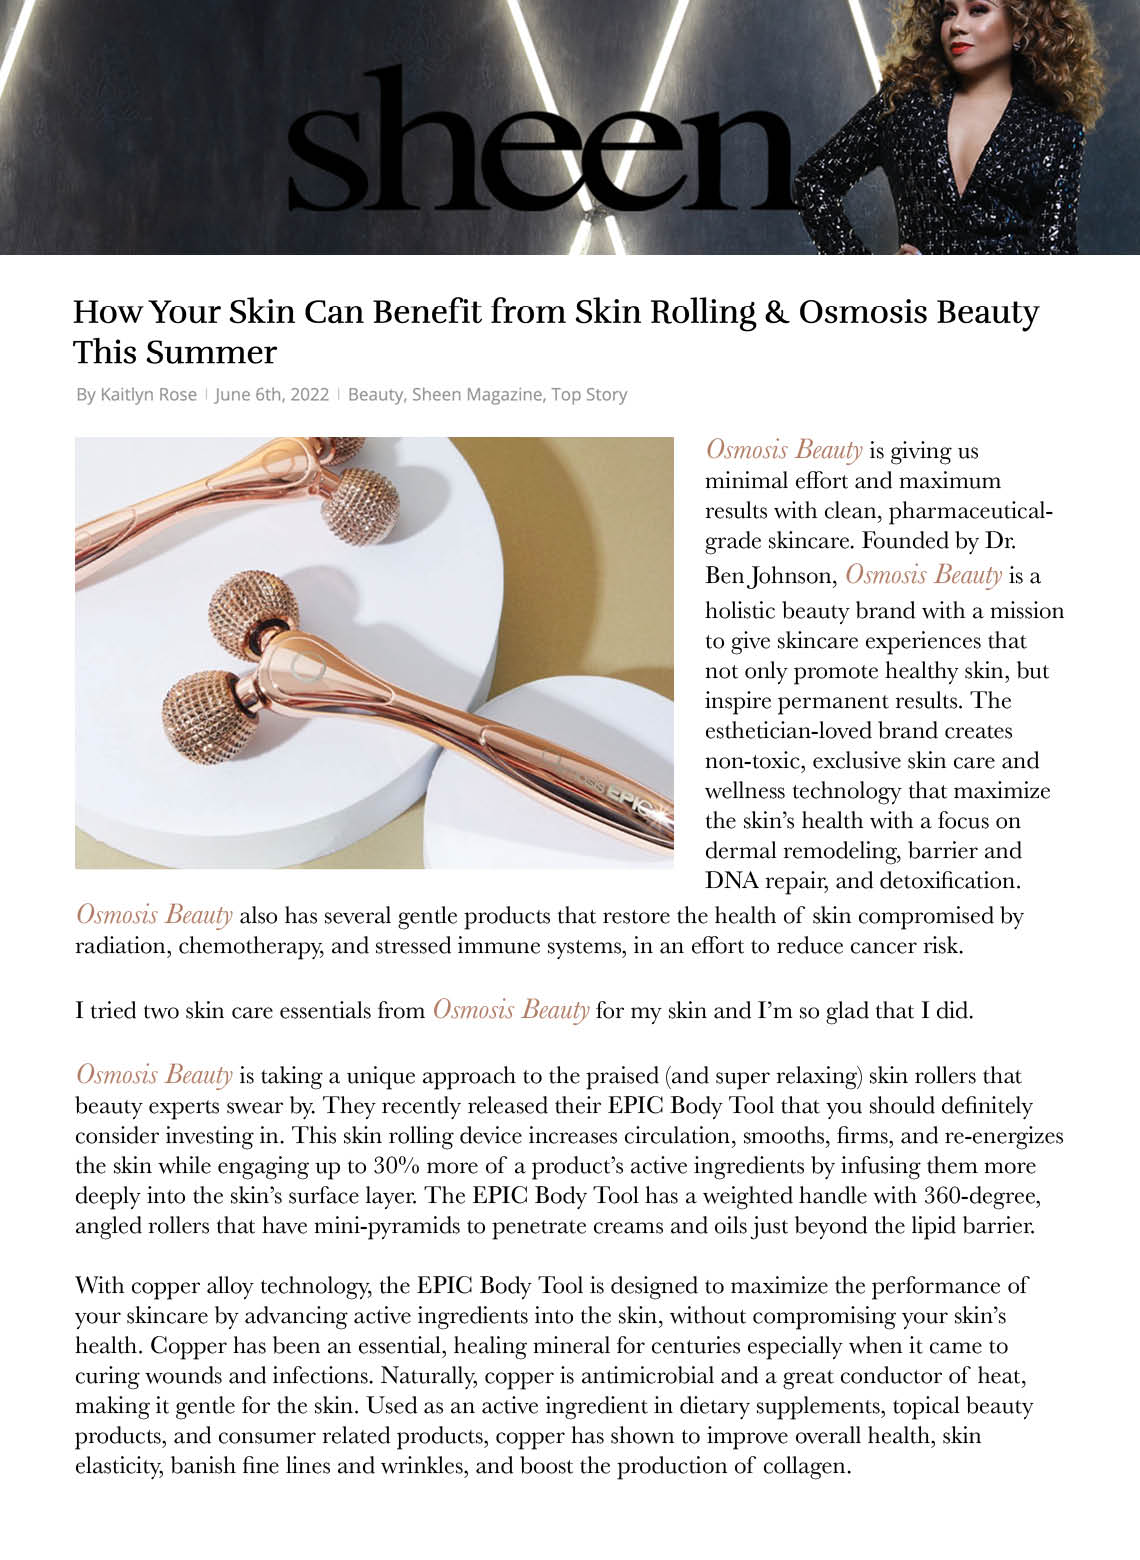 Sheen Magazine features Epic Body Tool and Rejuvenating Body Cream